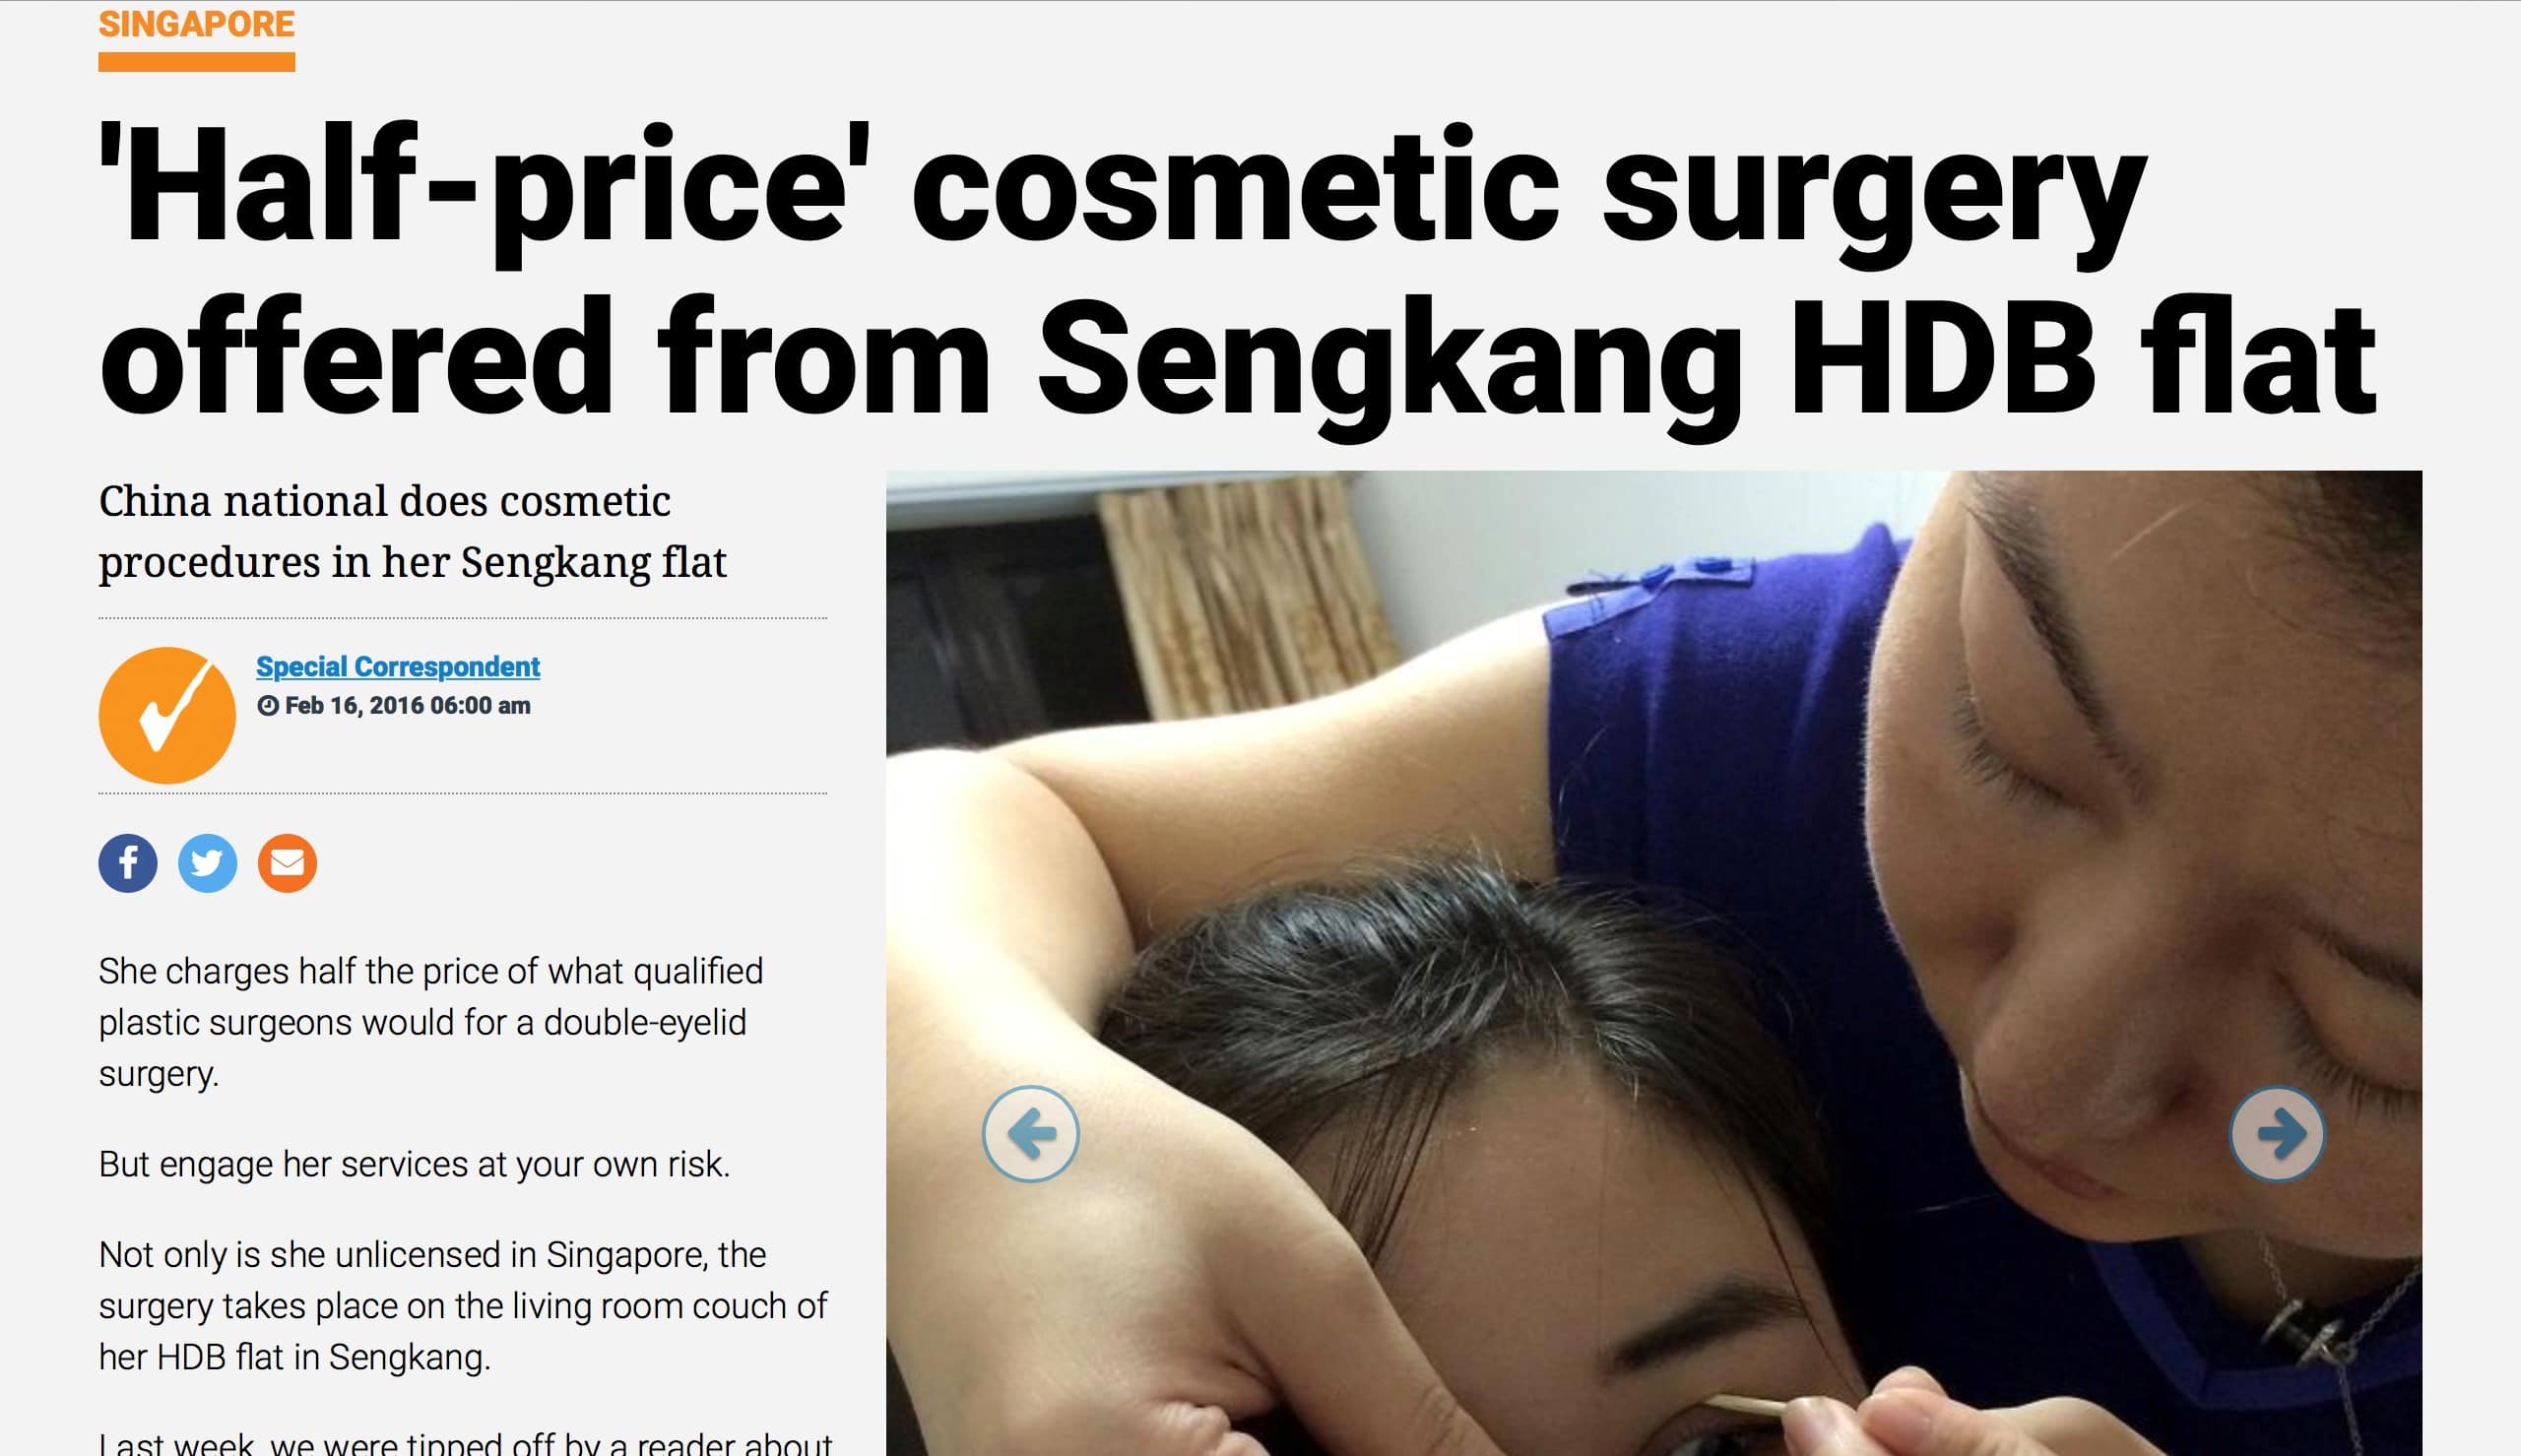 The New Paper Article on Cosmetic Surgery Treatments provided by quacks